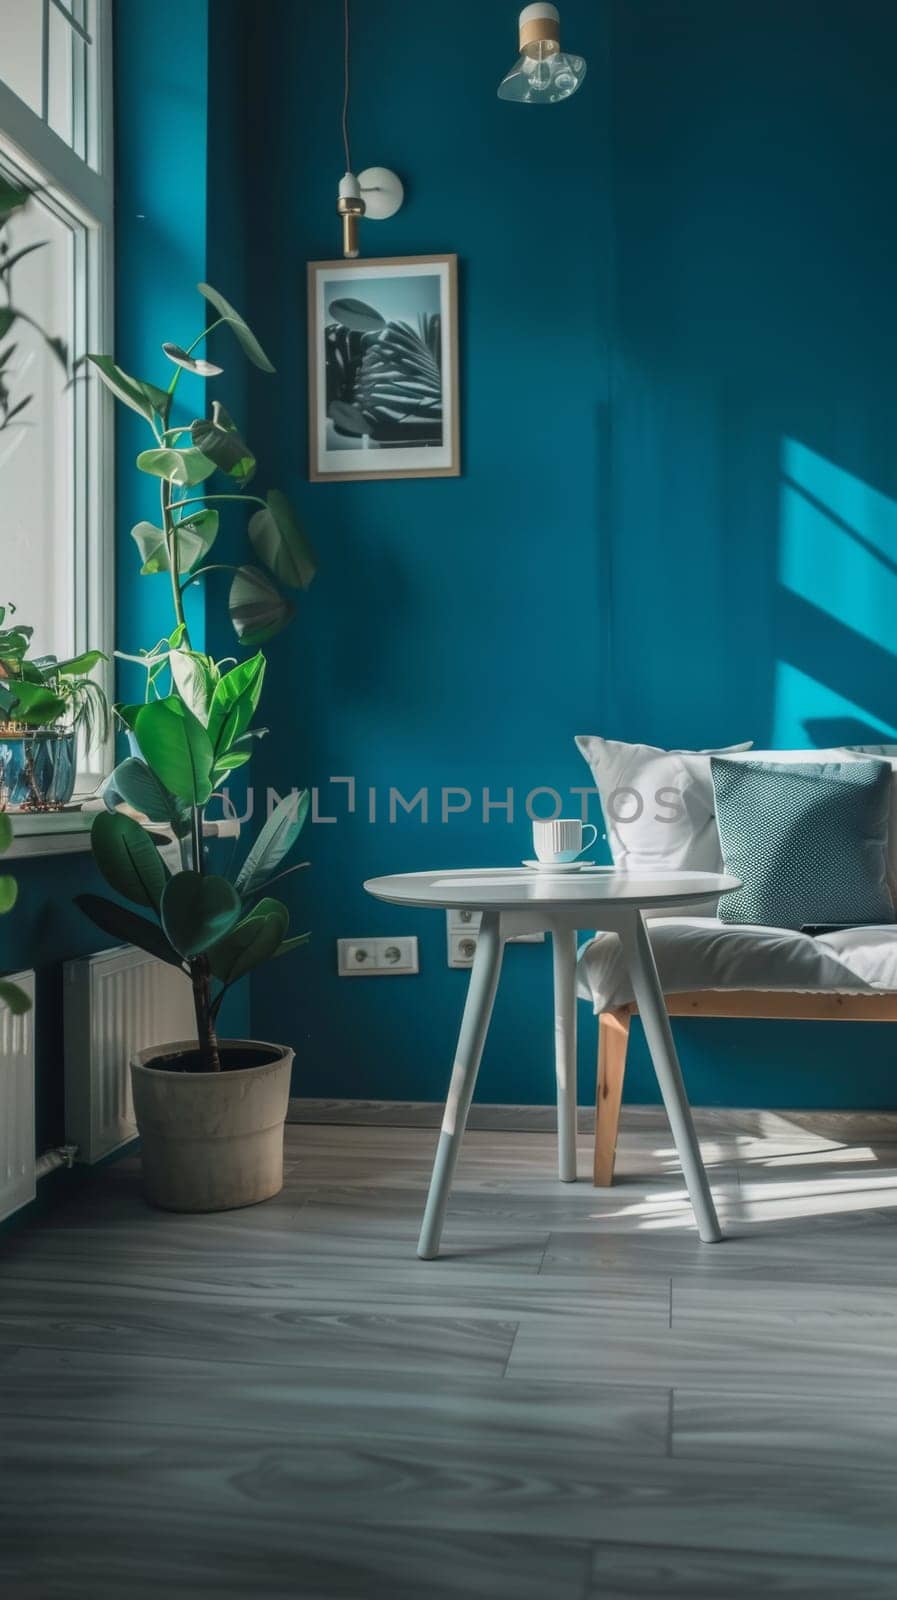 A cozy corner bathed in sunlight with a subtle blue wall, adding warmth to the minimal setup. by sfinks